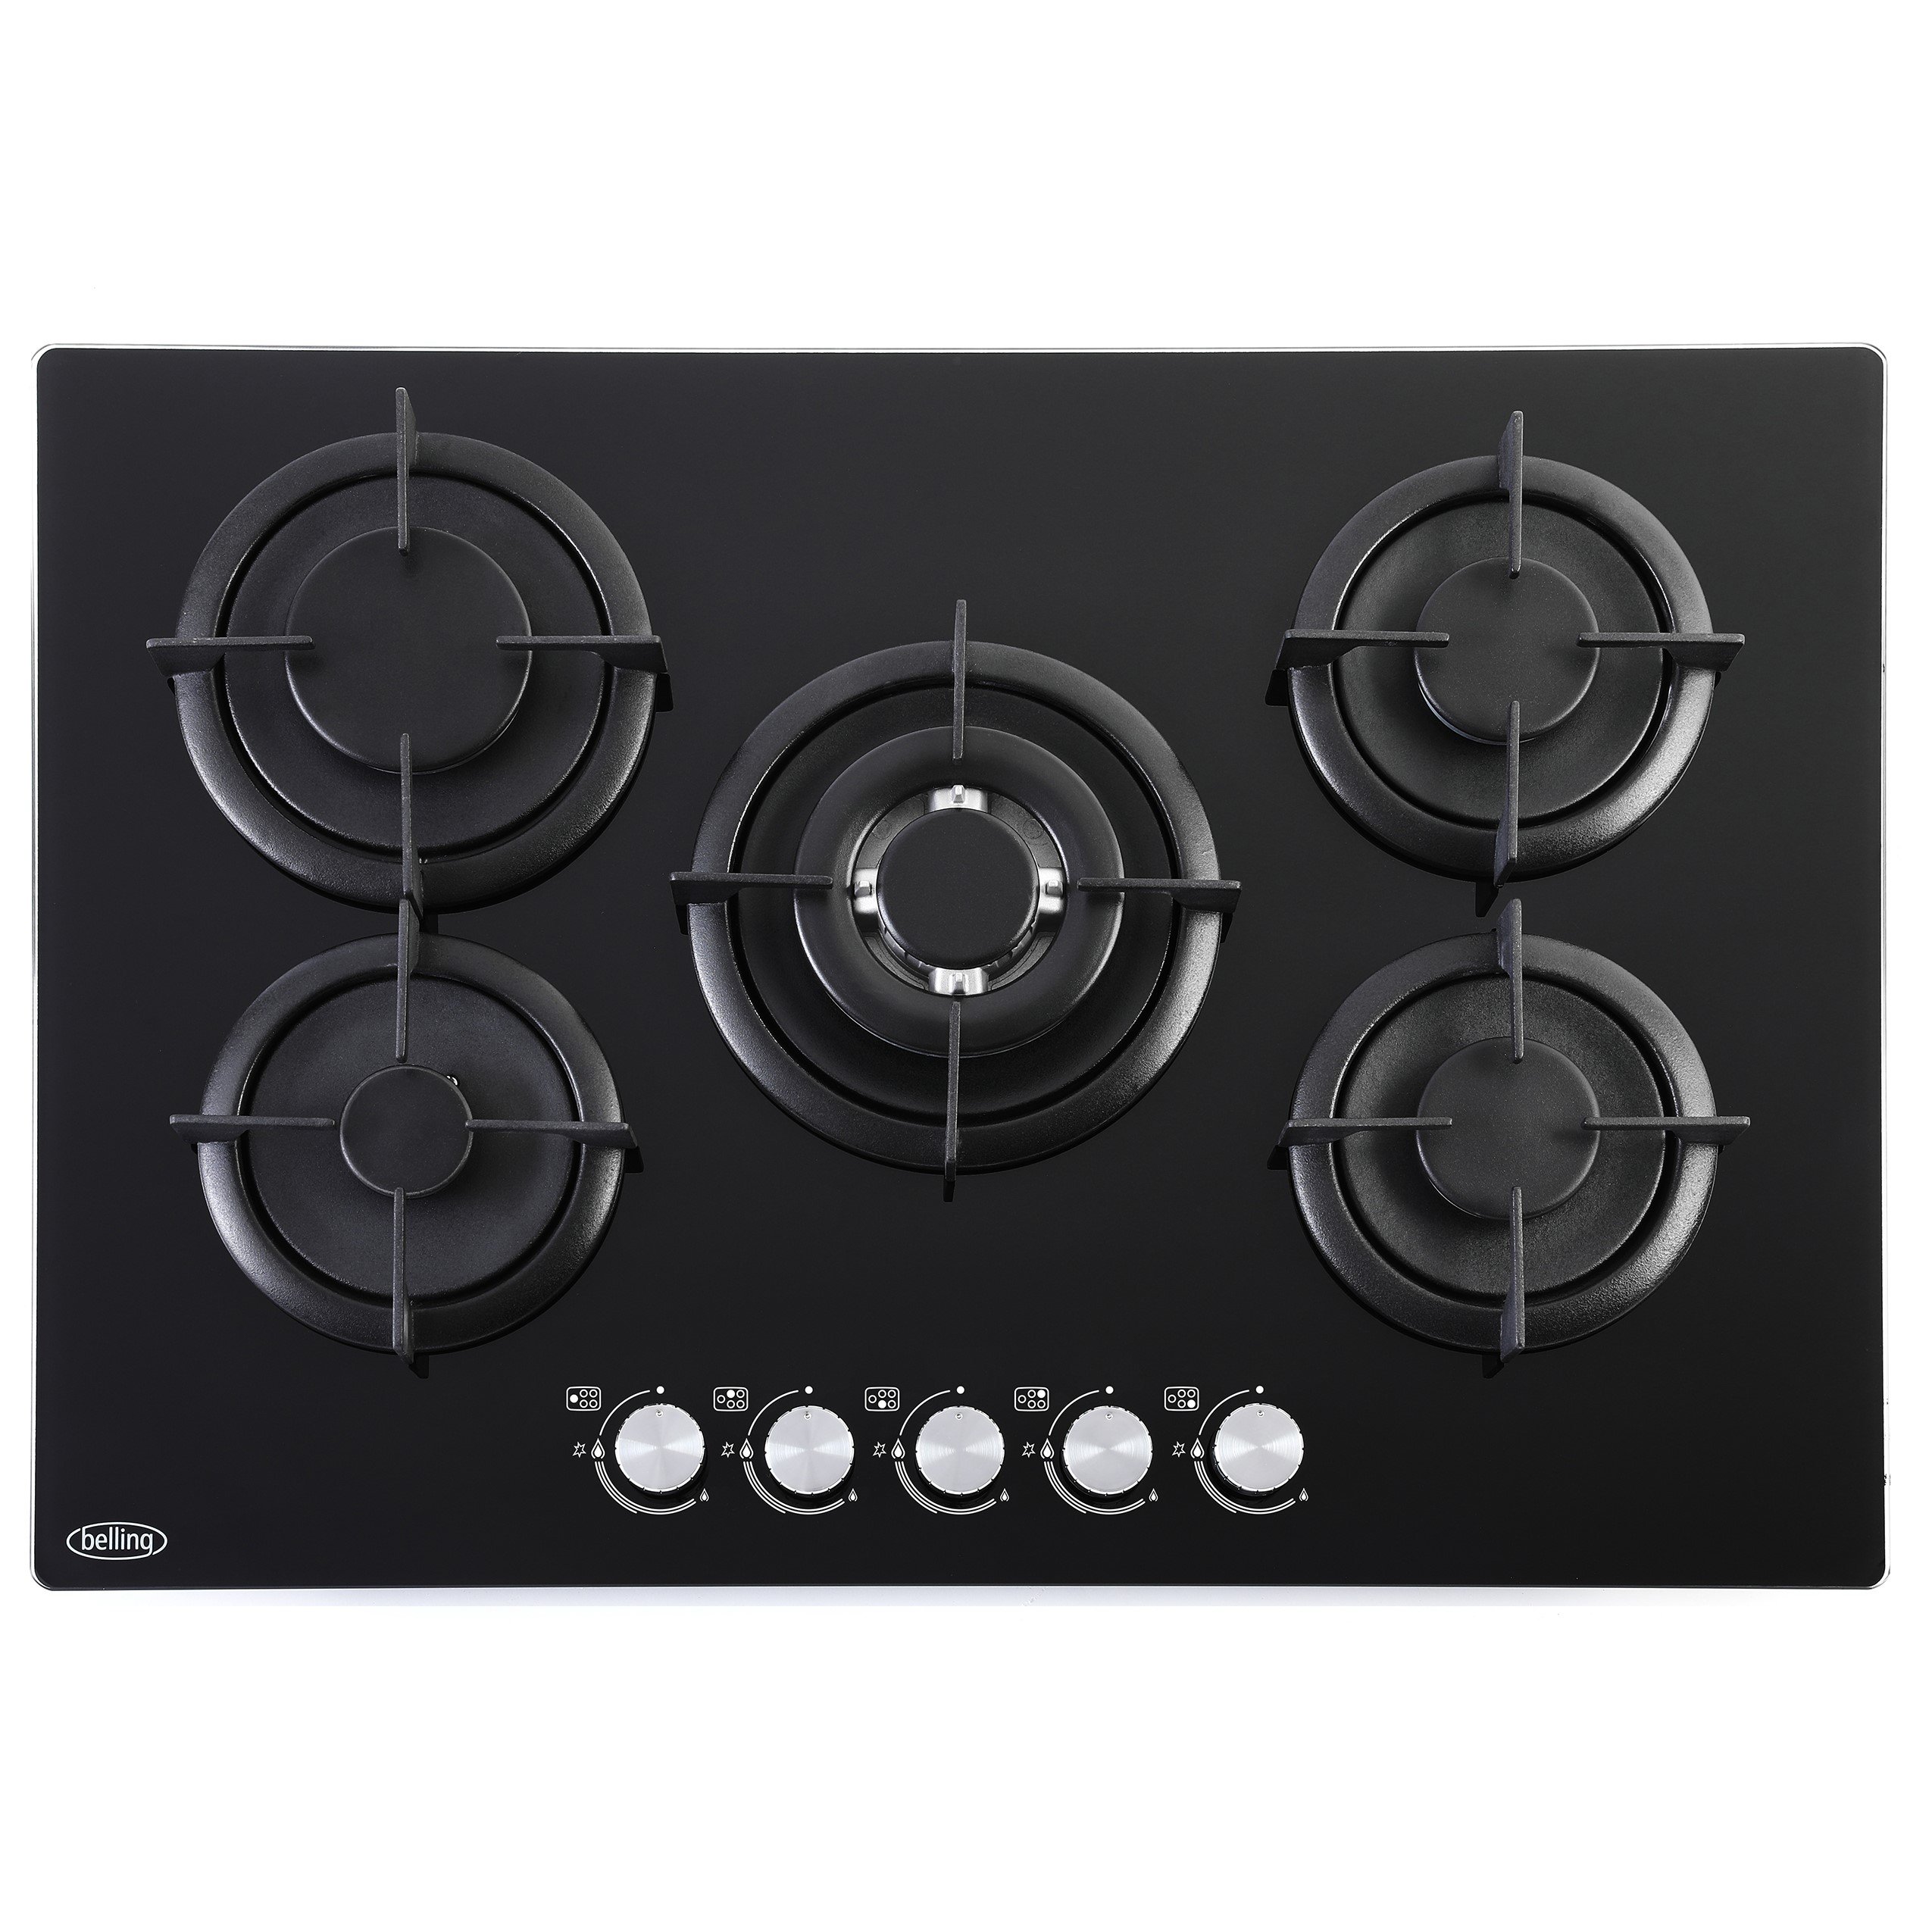 75cm gas through glass hob with powerful 3.6kW wok burner and ribbon iron pan supports